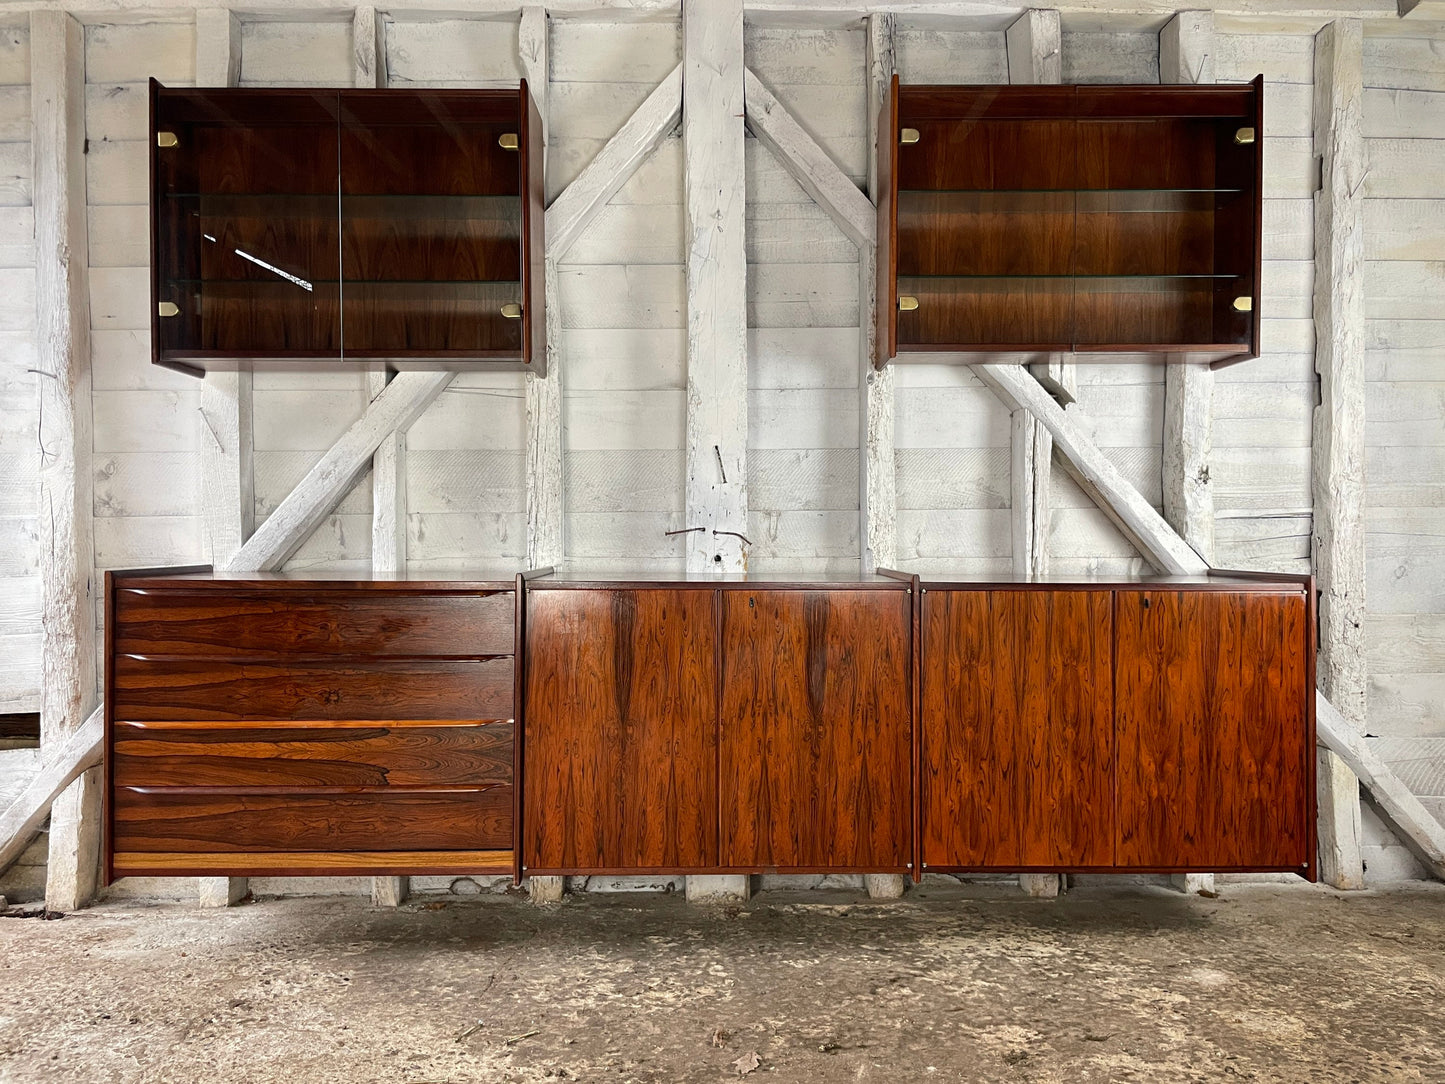 Floating/Wall-Mounted Rosewood Sideboard/Credenza and Glass Cabinets by Ib Juul Christensen Mid Century Modern Danish 1960s